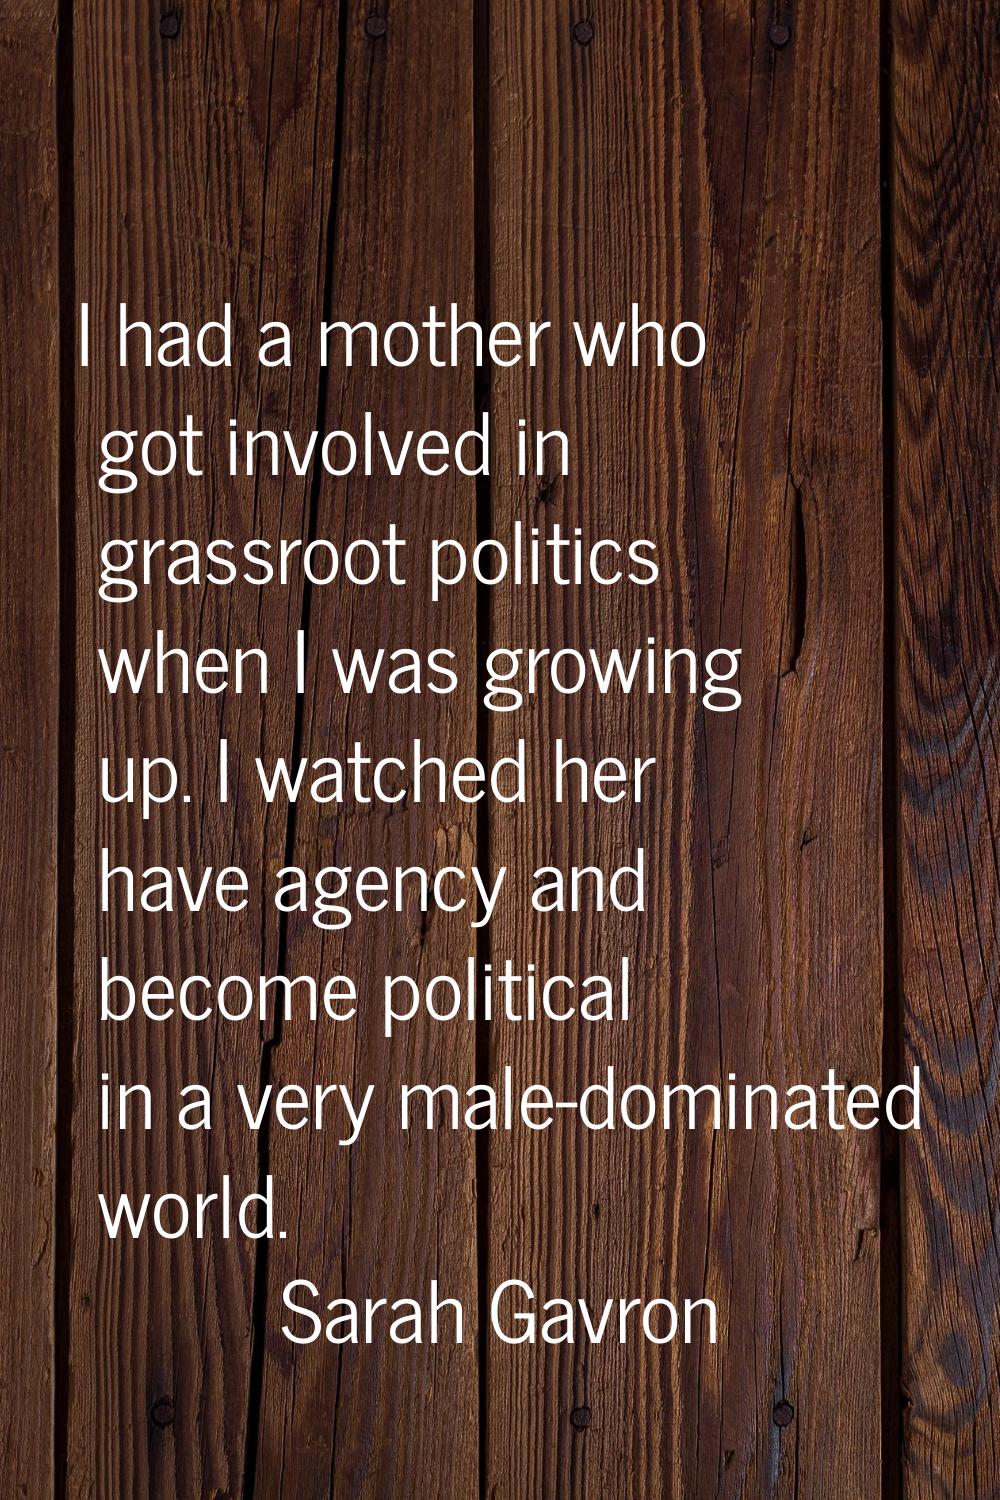 I had a mother who got involved in grassroot politics when I was growing up. I watched her have age